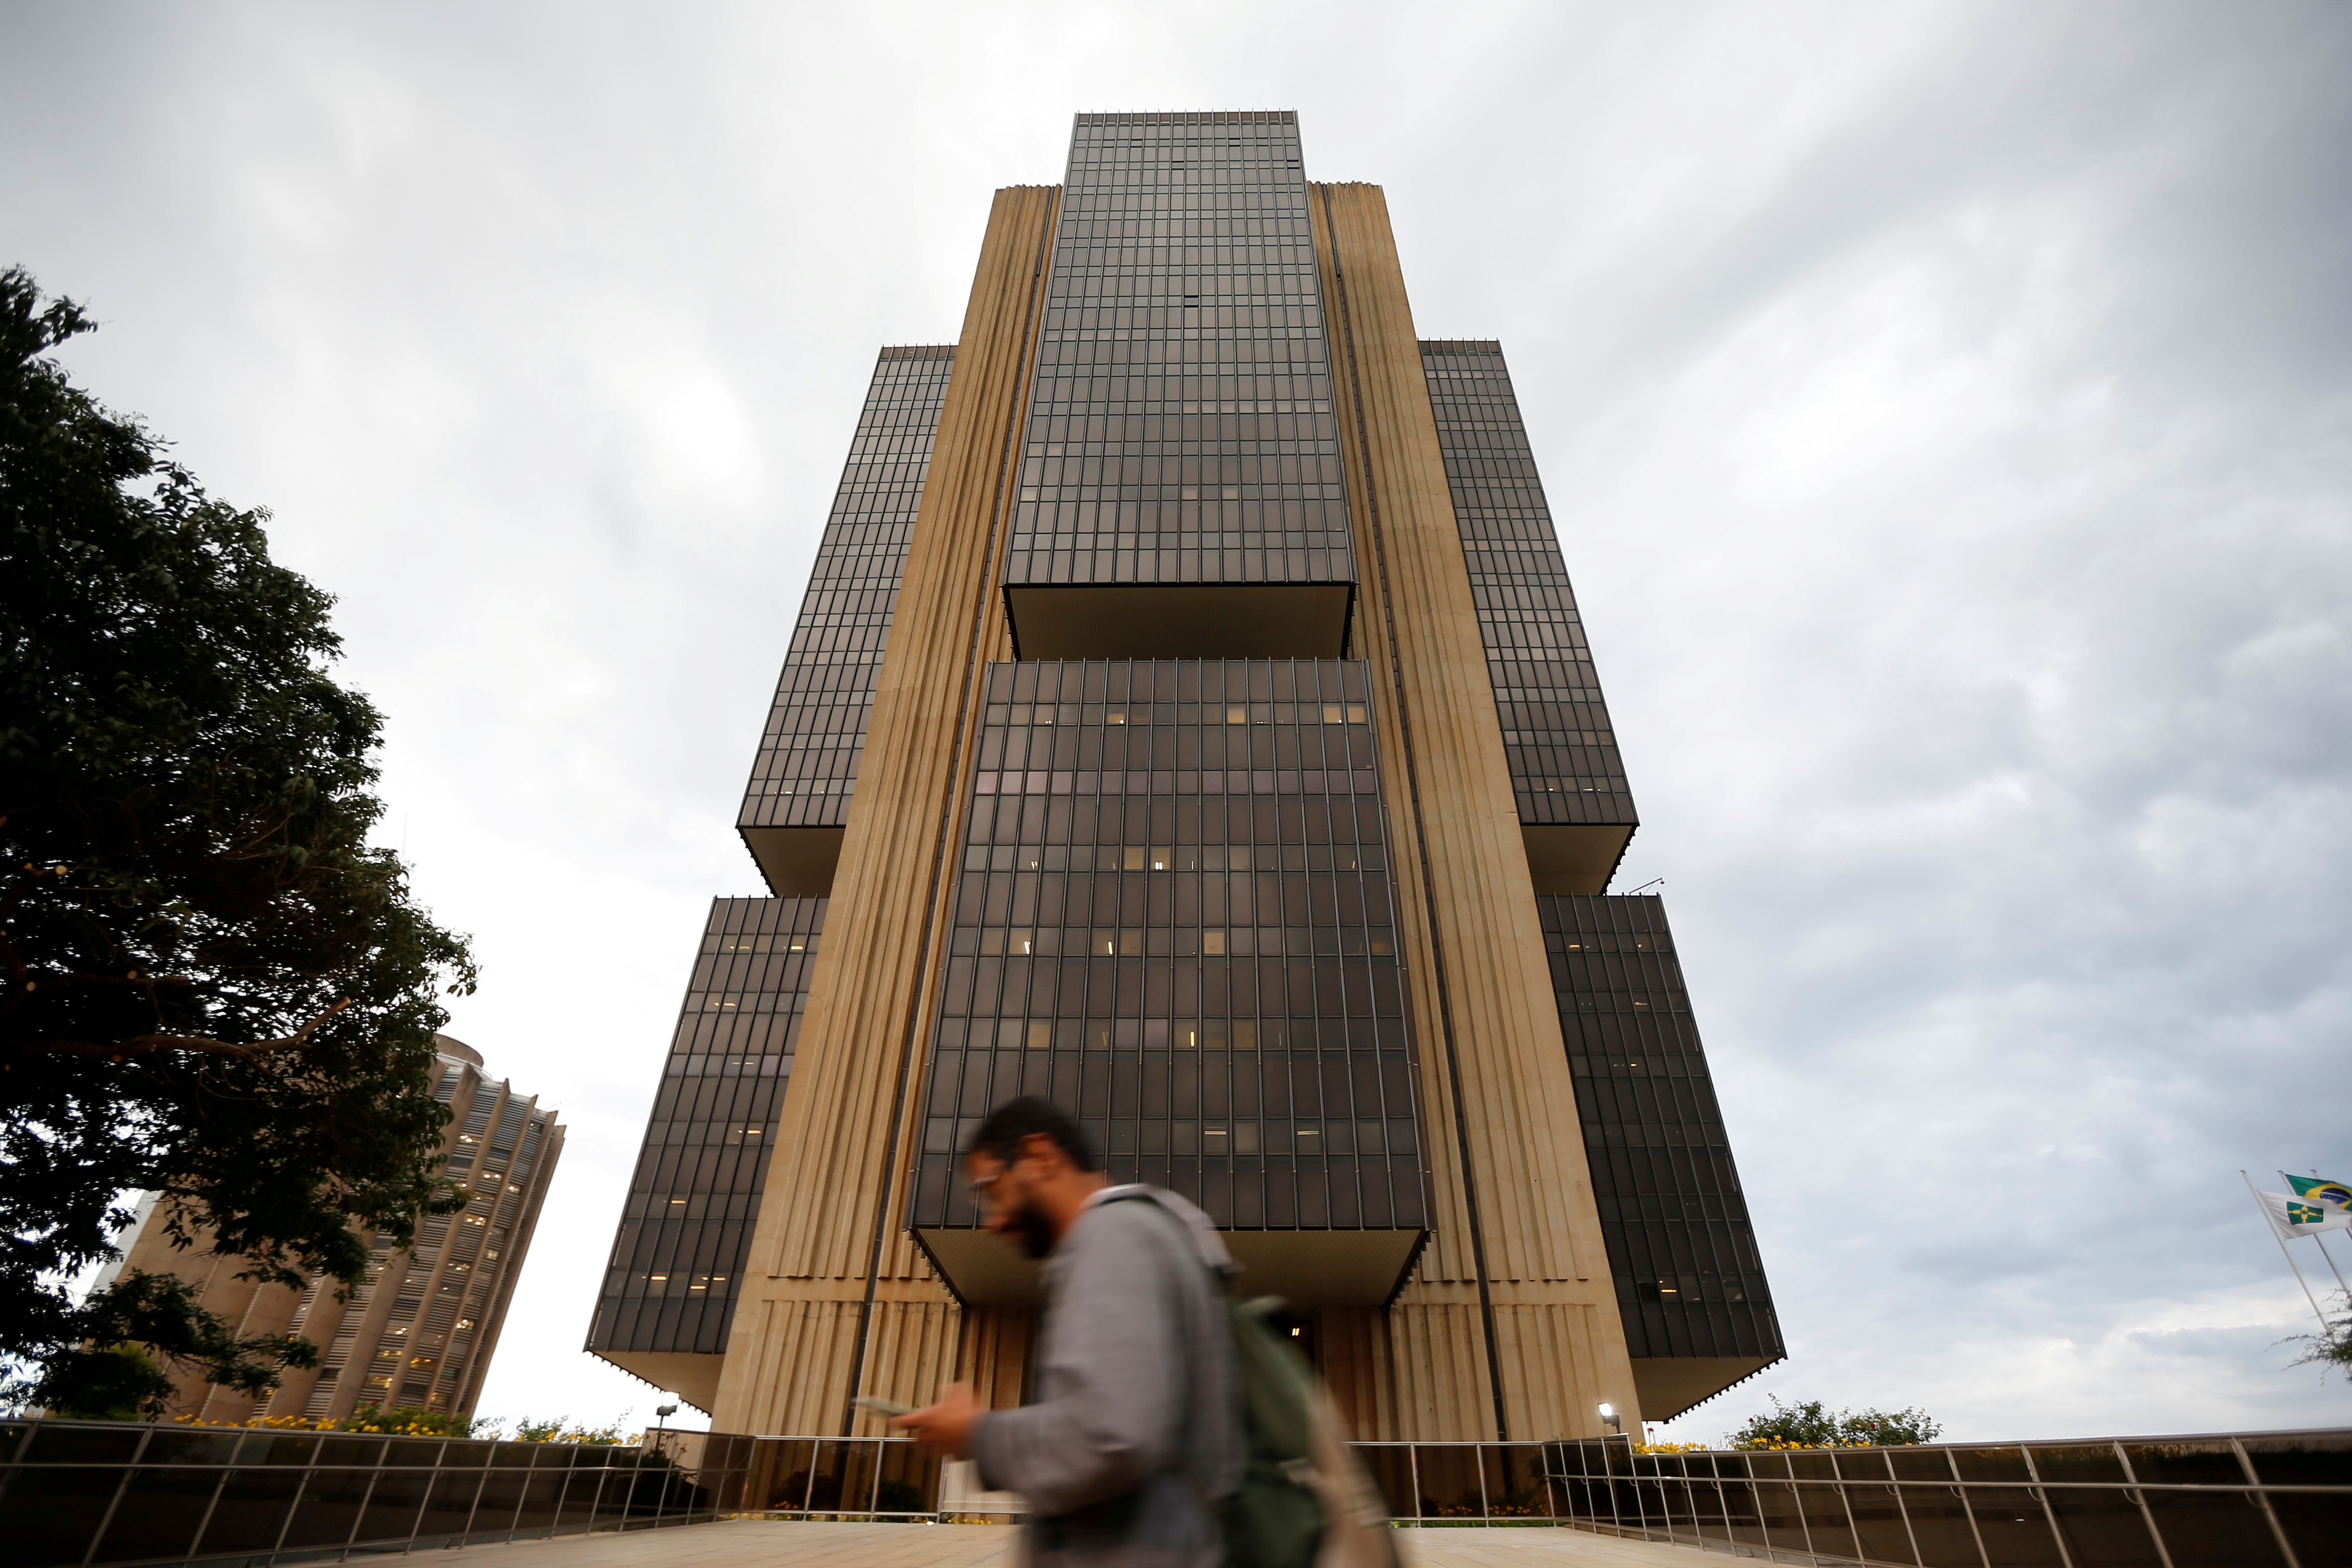 A man walks in front the Central bank headquarters building in Brasilia